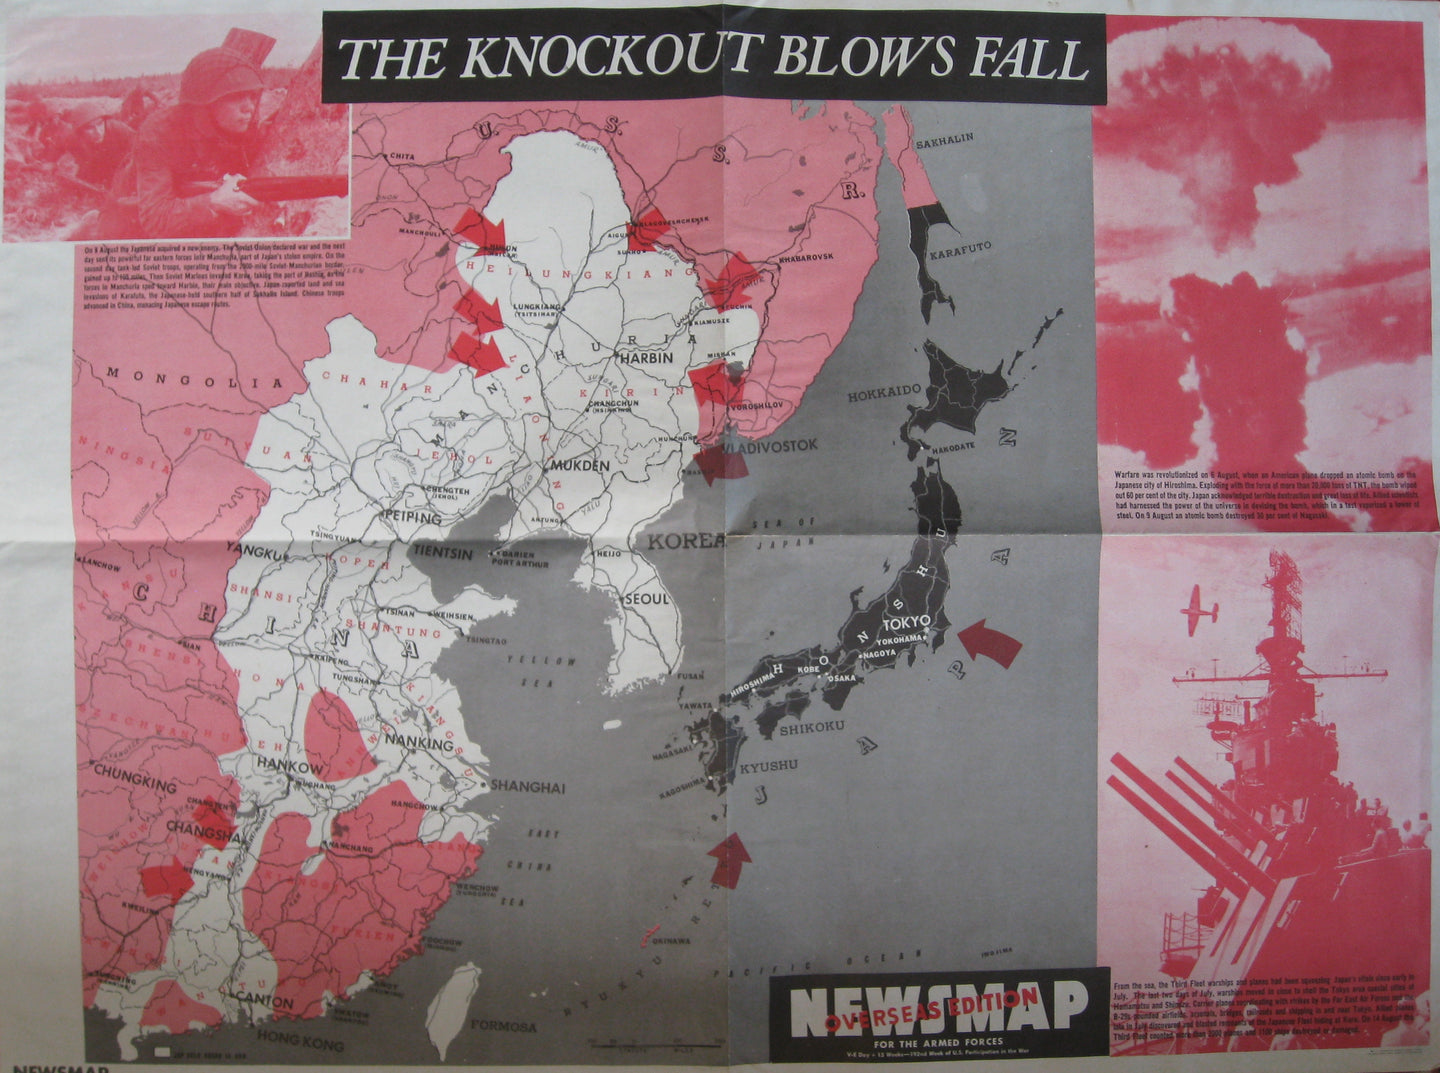 Antique-Military-Lithographed-Map-Knockout-Blows-Fall-Newsmap-**********-Military-World-War-II-1945-U.S.-Government-Maps-Of-Antiquity